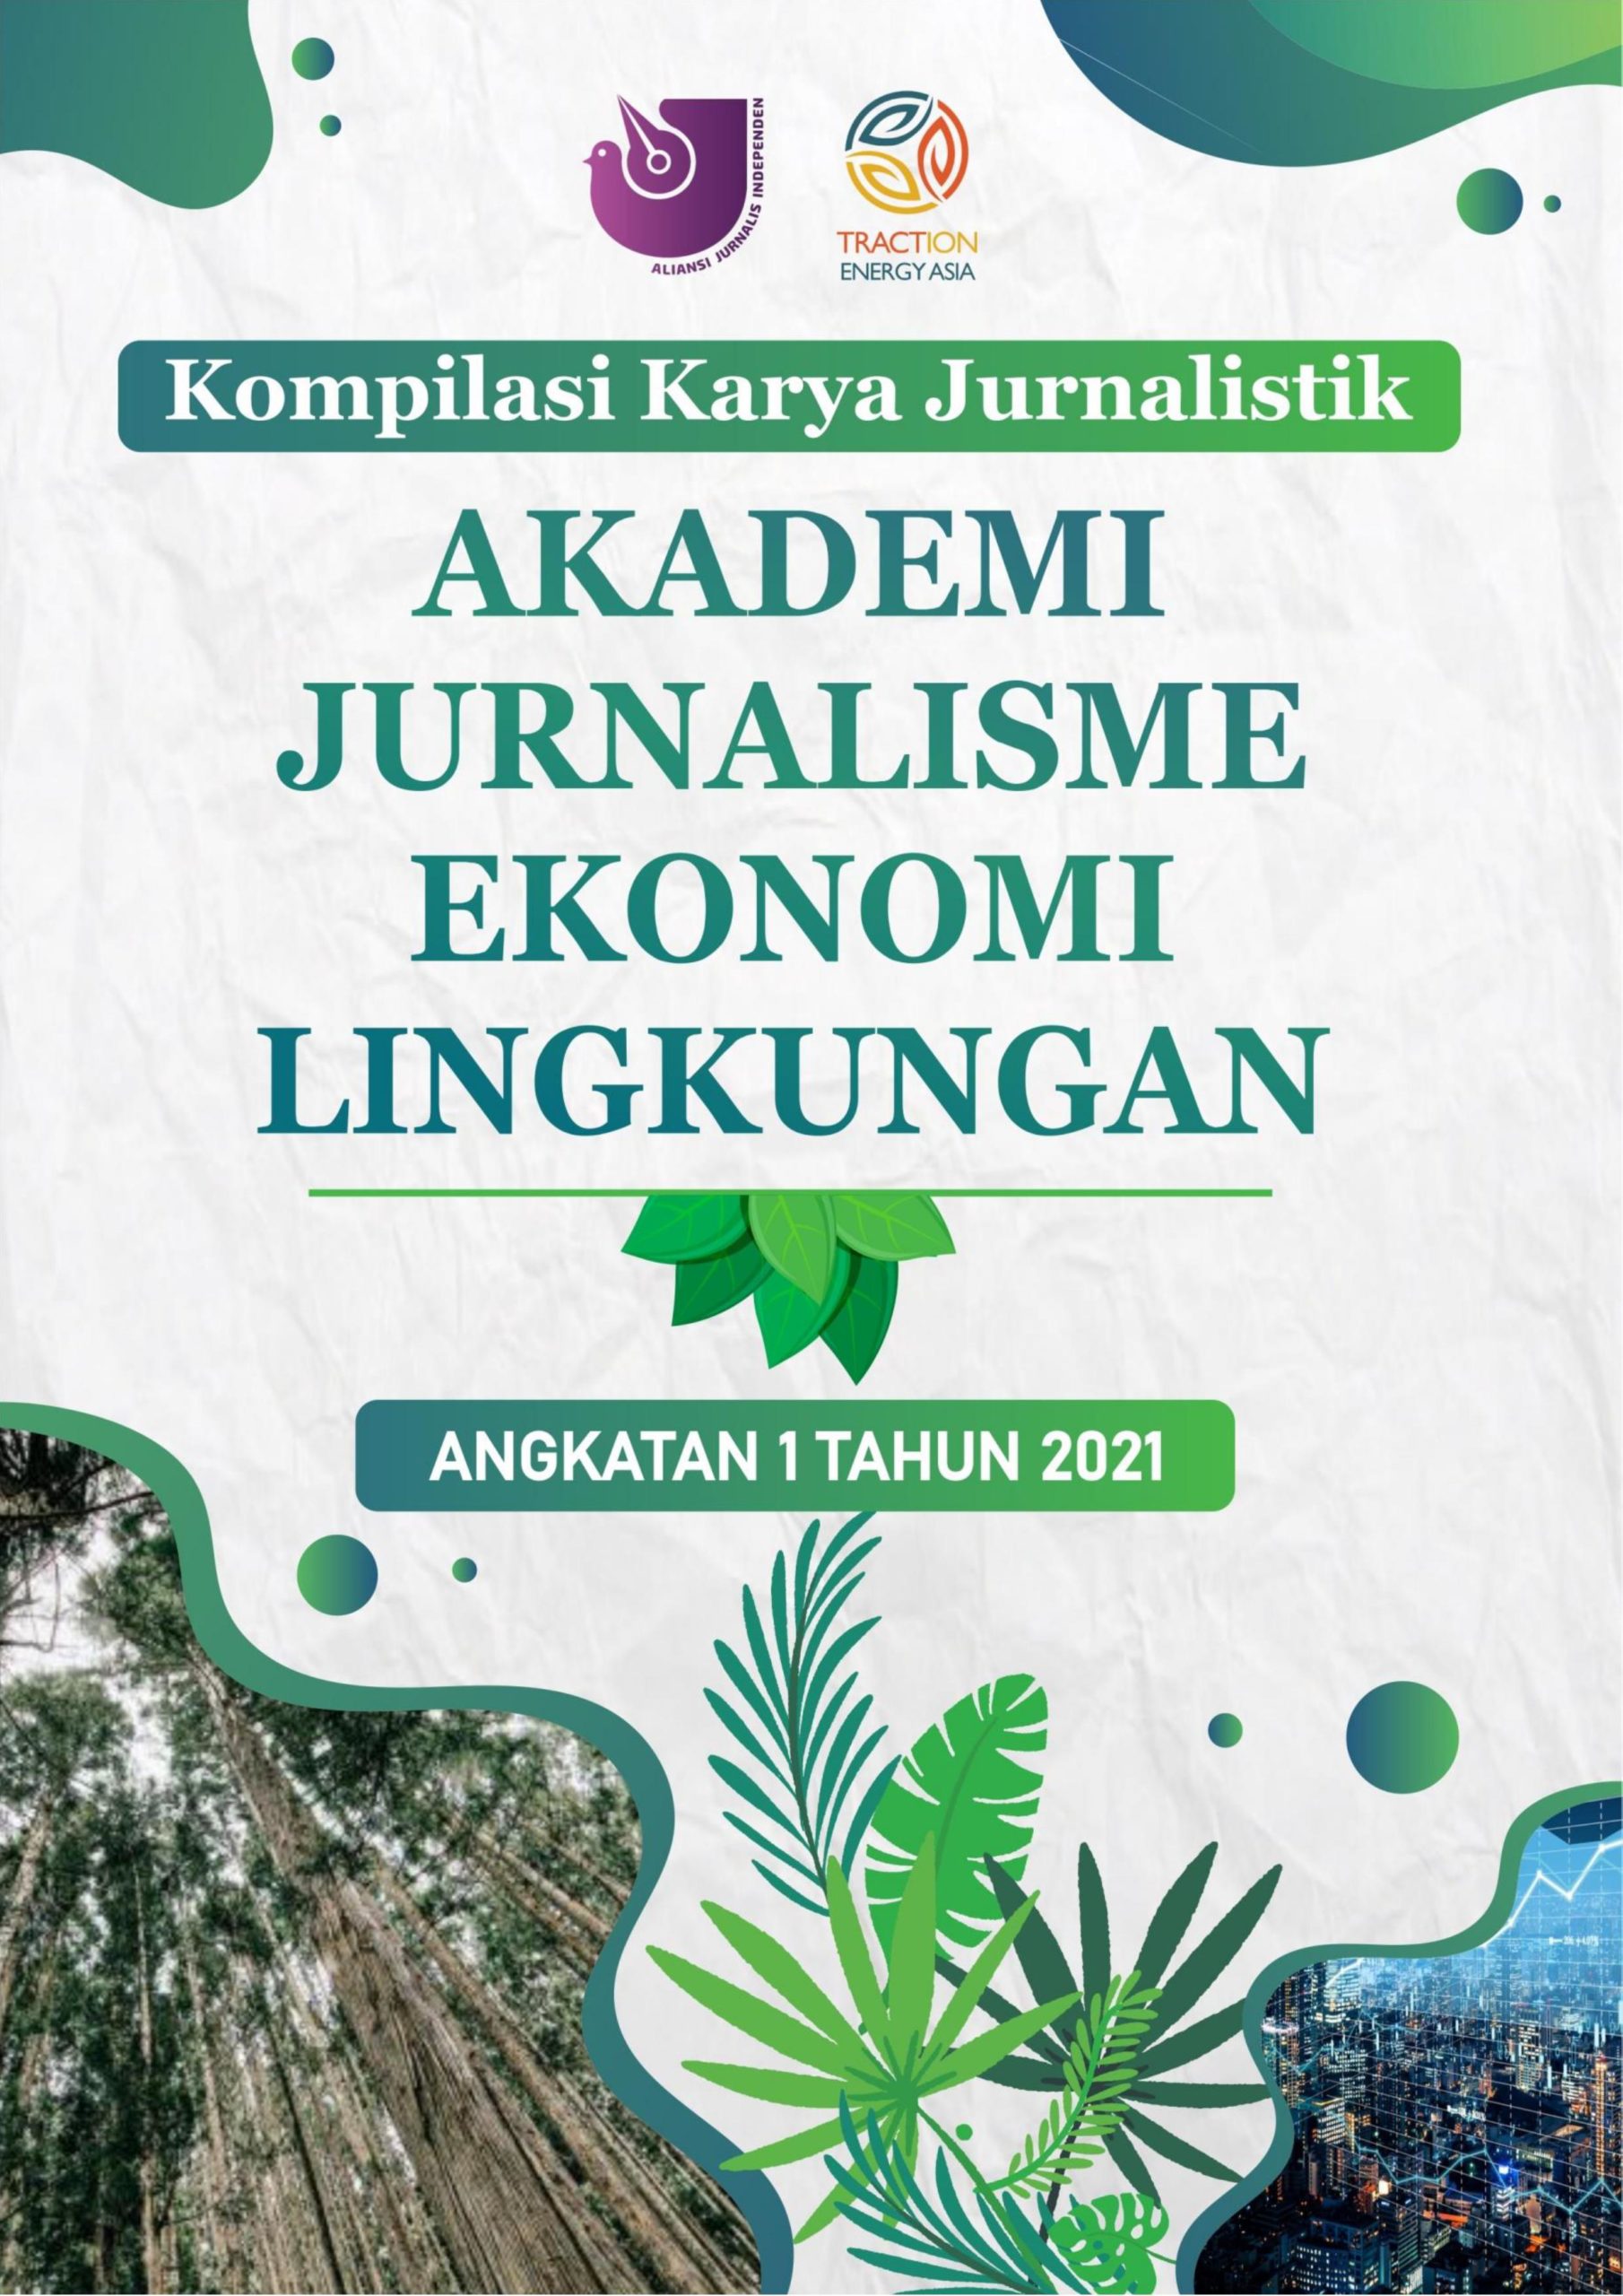 You are currently viewing Compilation of Articles from the Academy of Environmental Economic Journalism (AJEL)